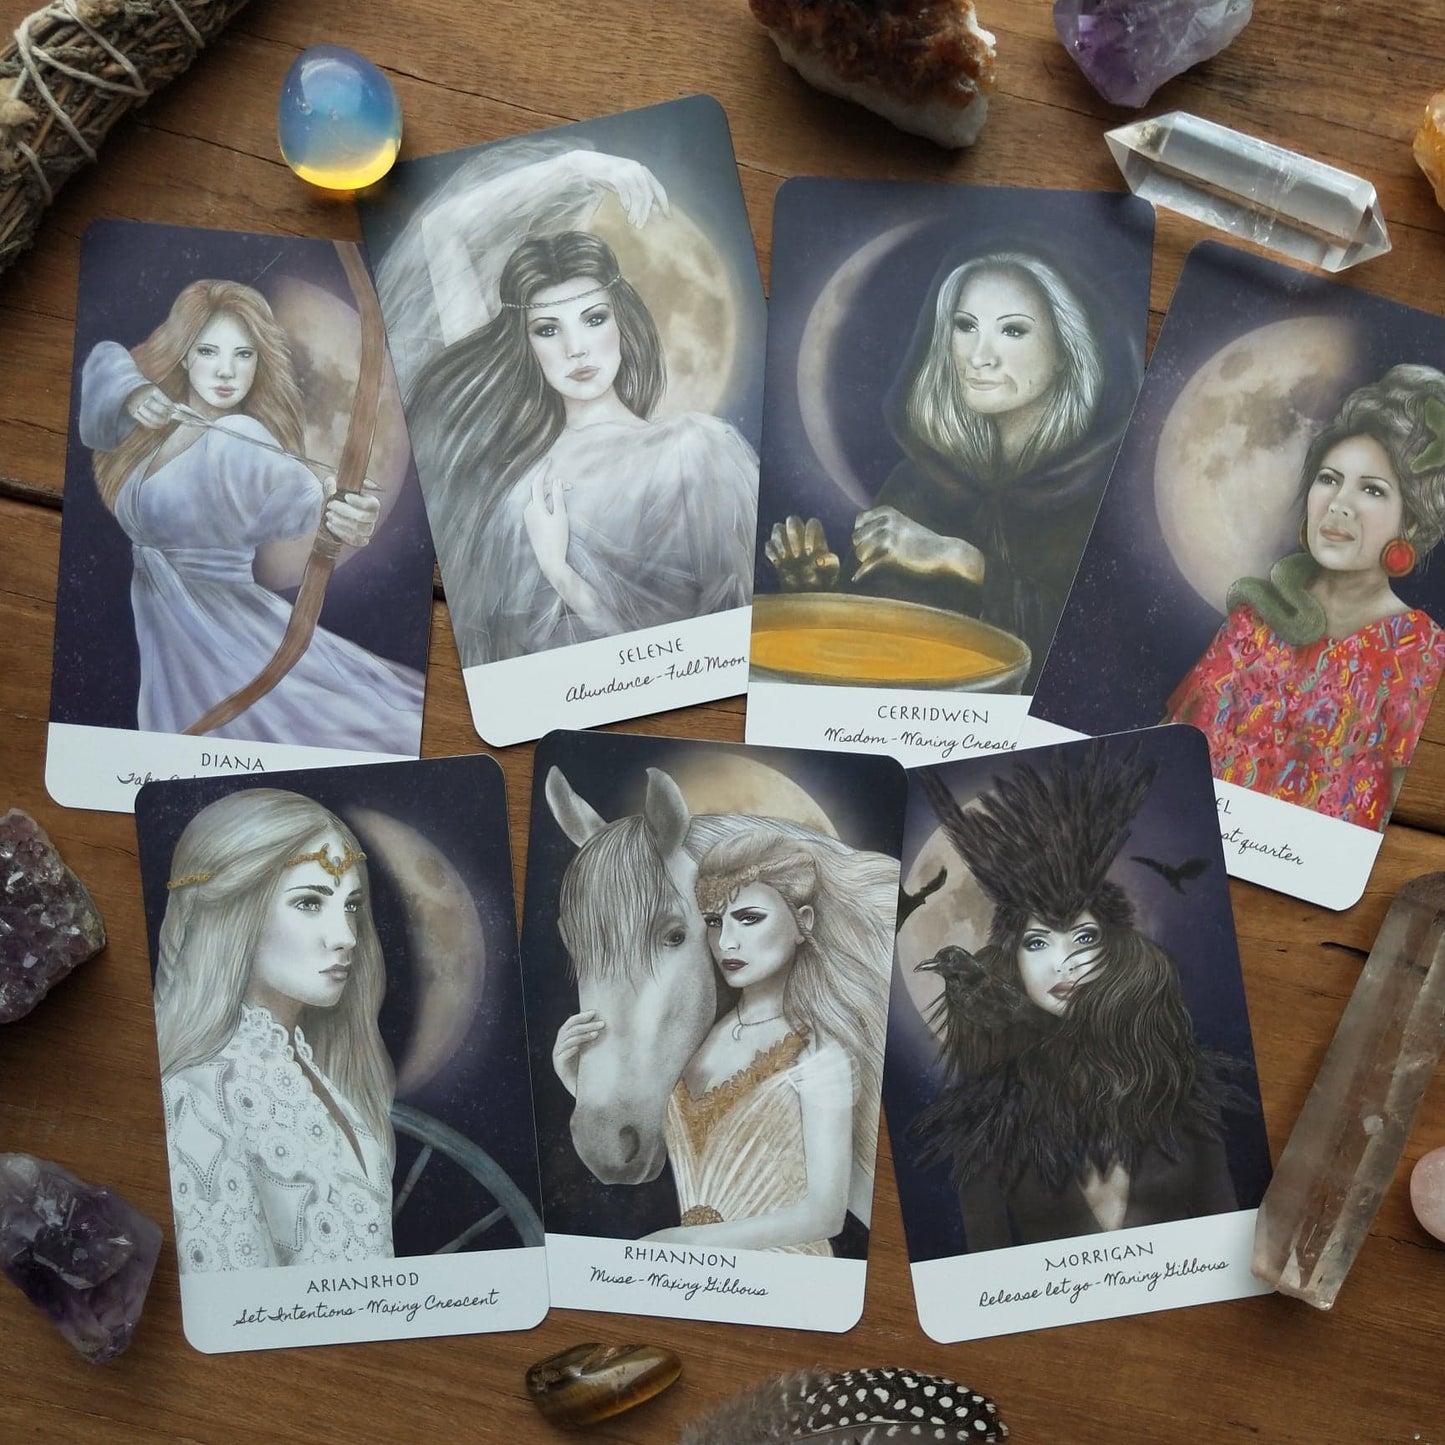 Goddess Spirit Oracle Deck - Indi edition - Includes FREE 5x7" print of your choice